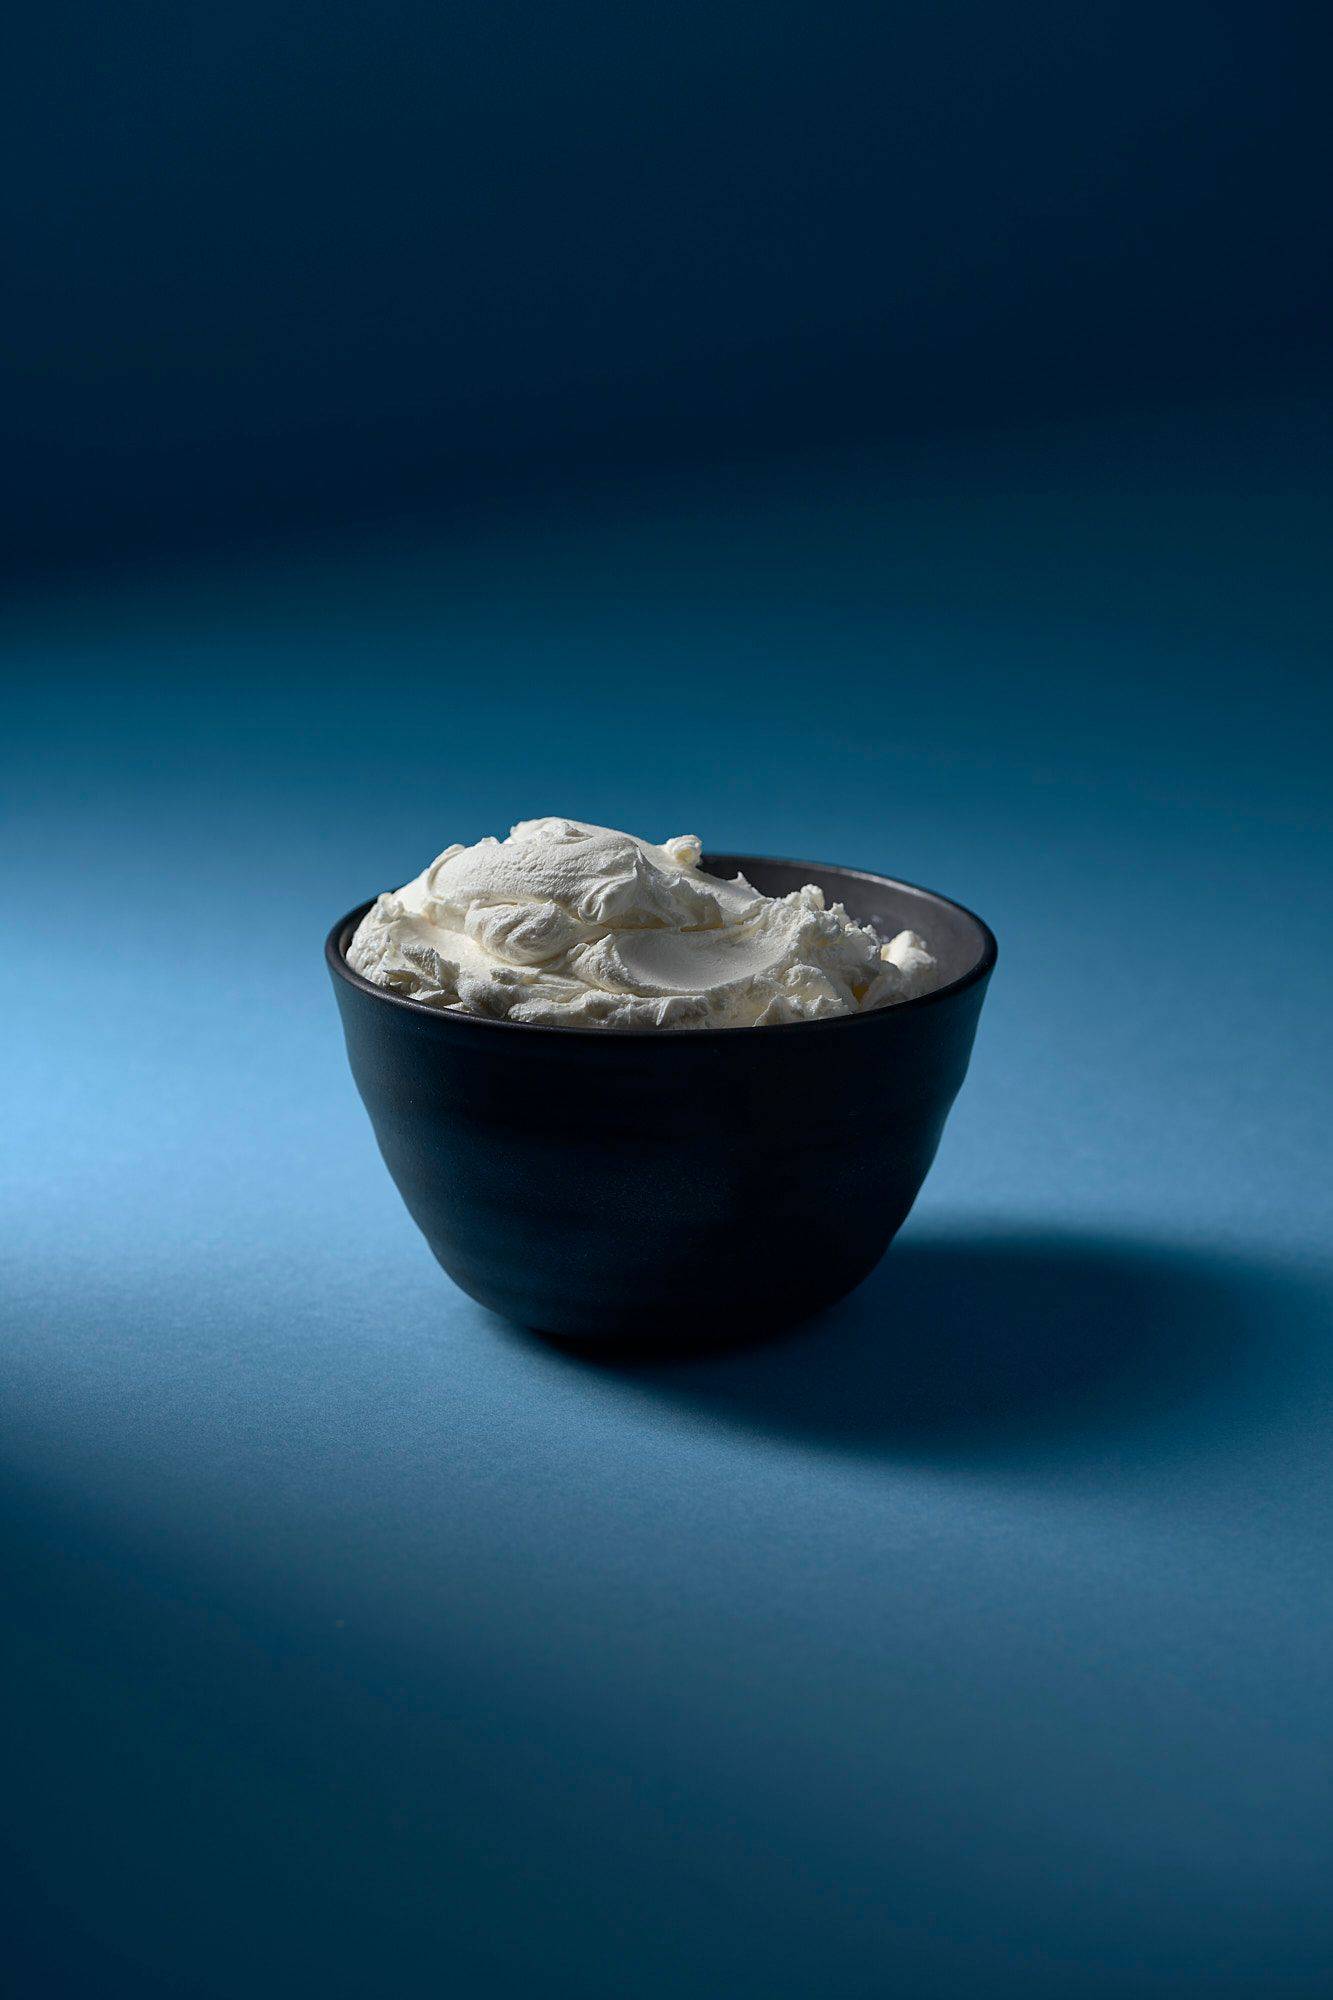 mascarpone cheese in a gray ceramic bowl with blue background